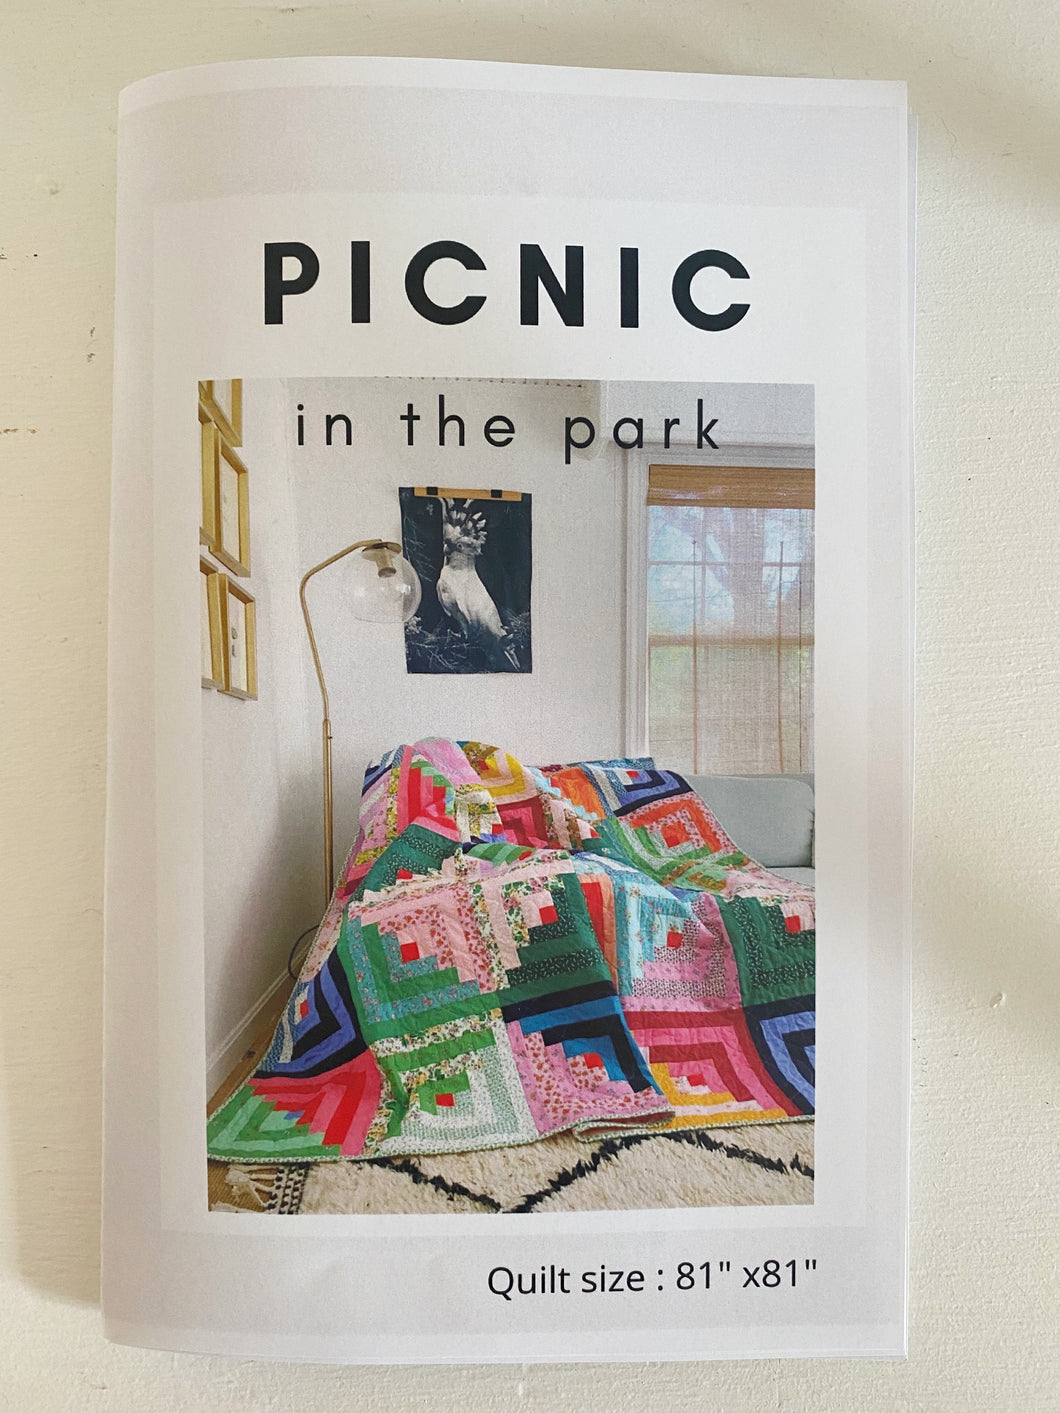 Picnic in the park printed pattern